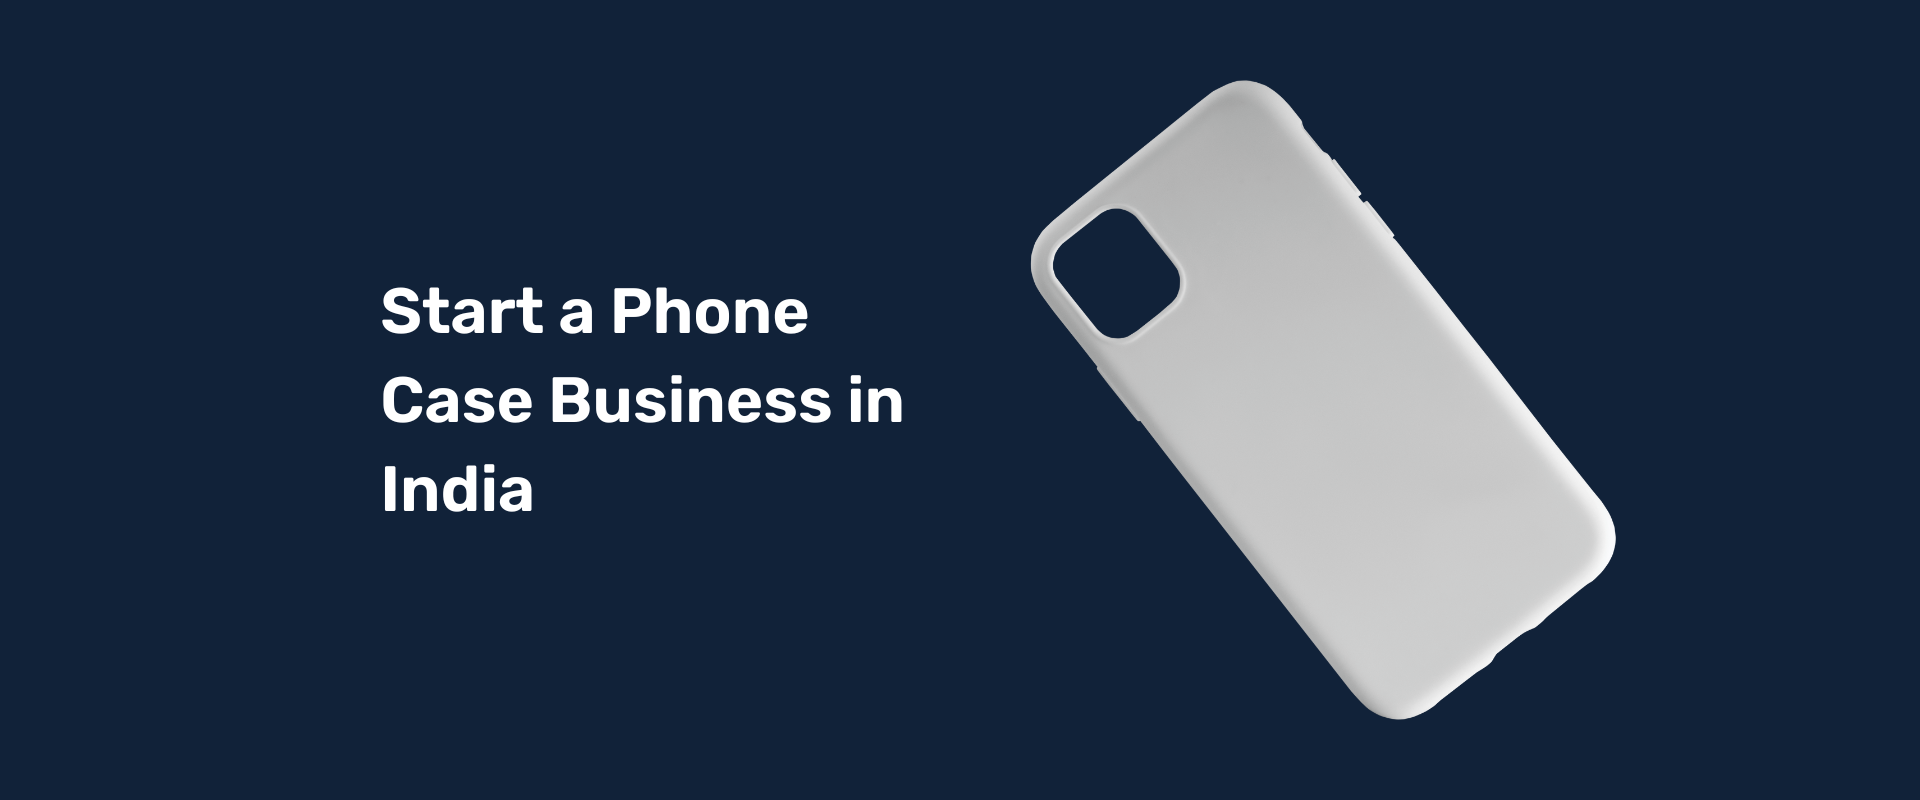 How to start a phone case business in India: 7 Step Ultimate Guide